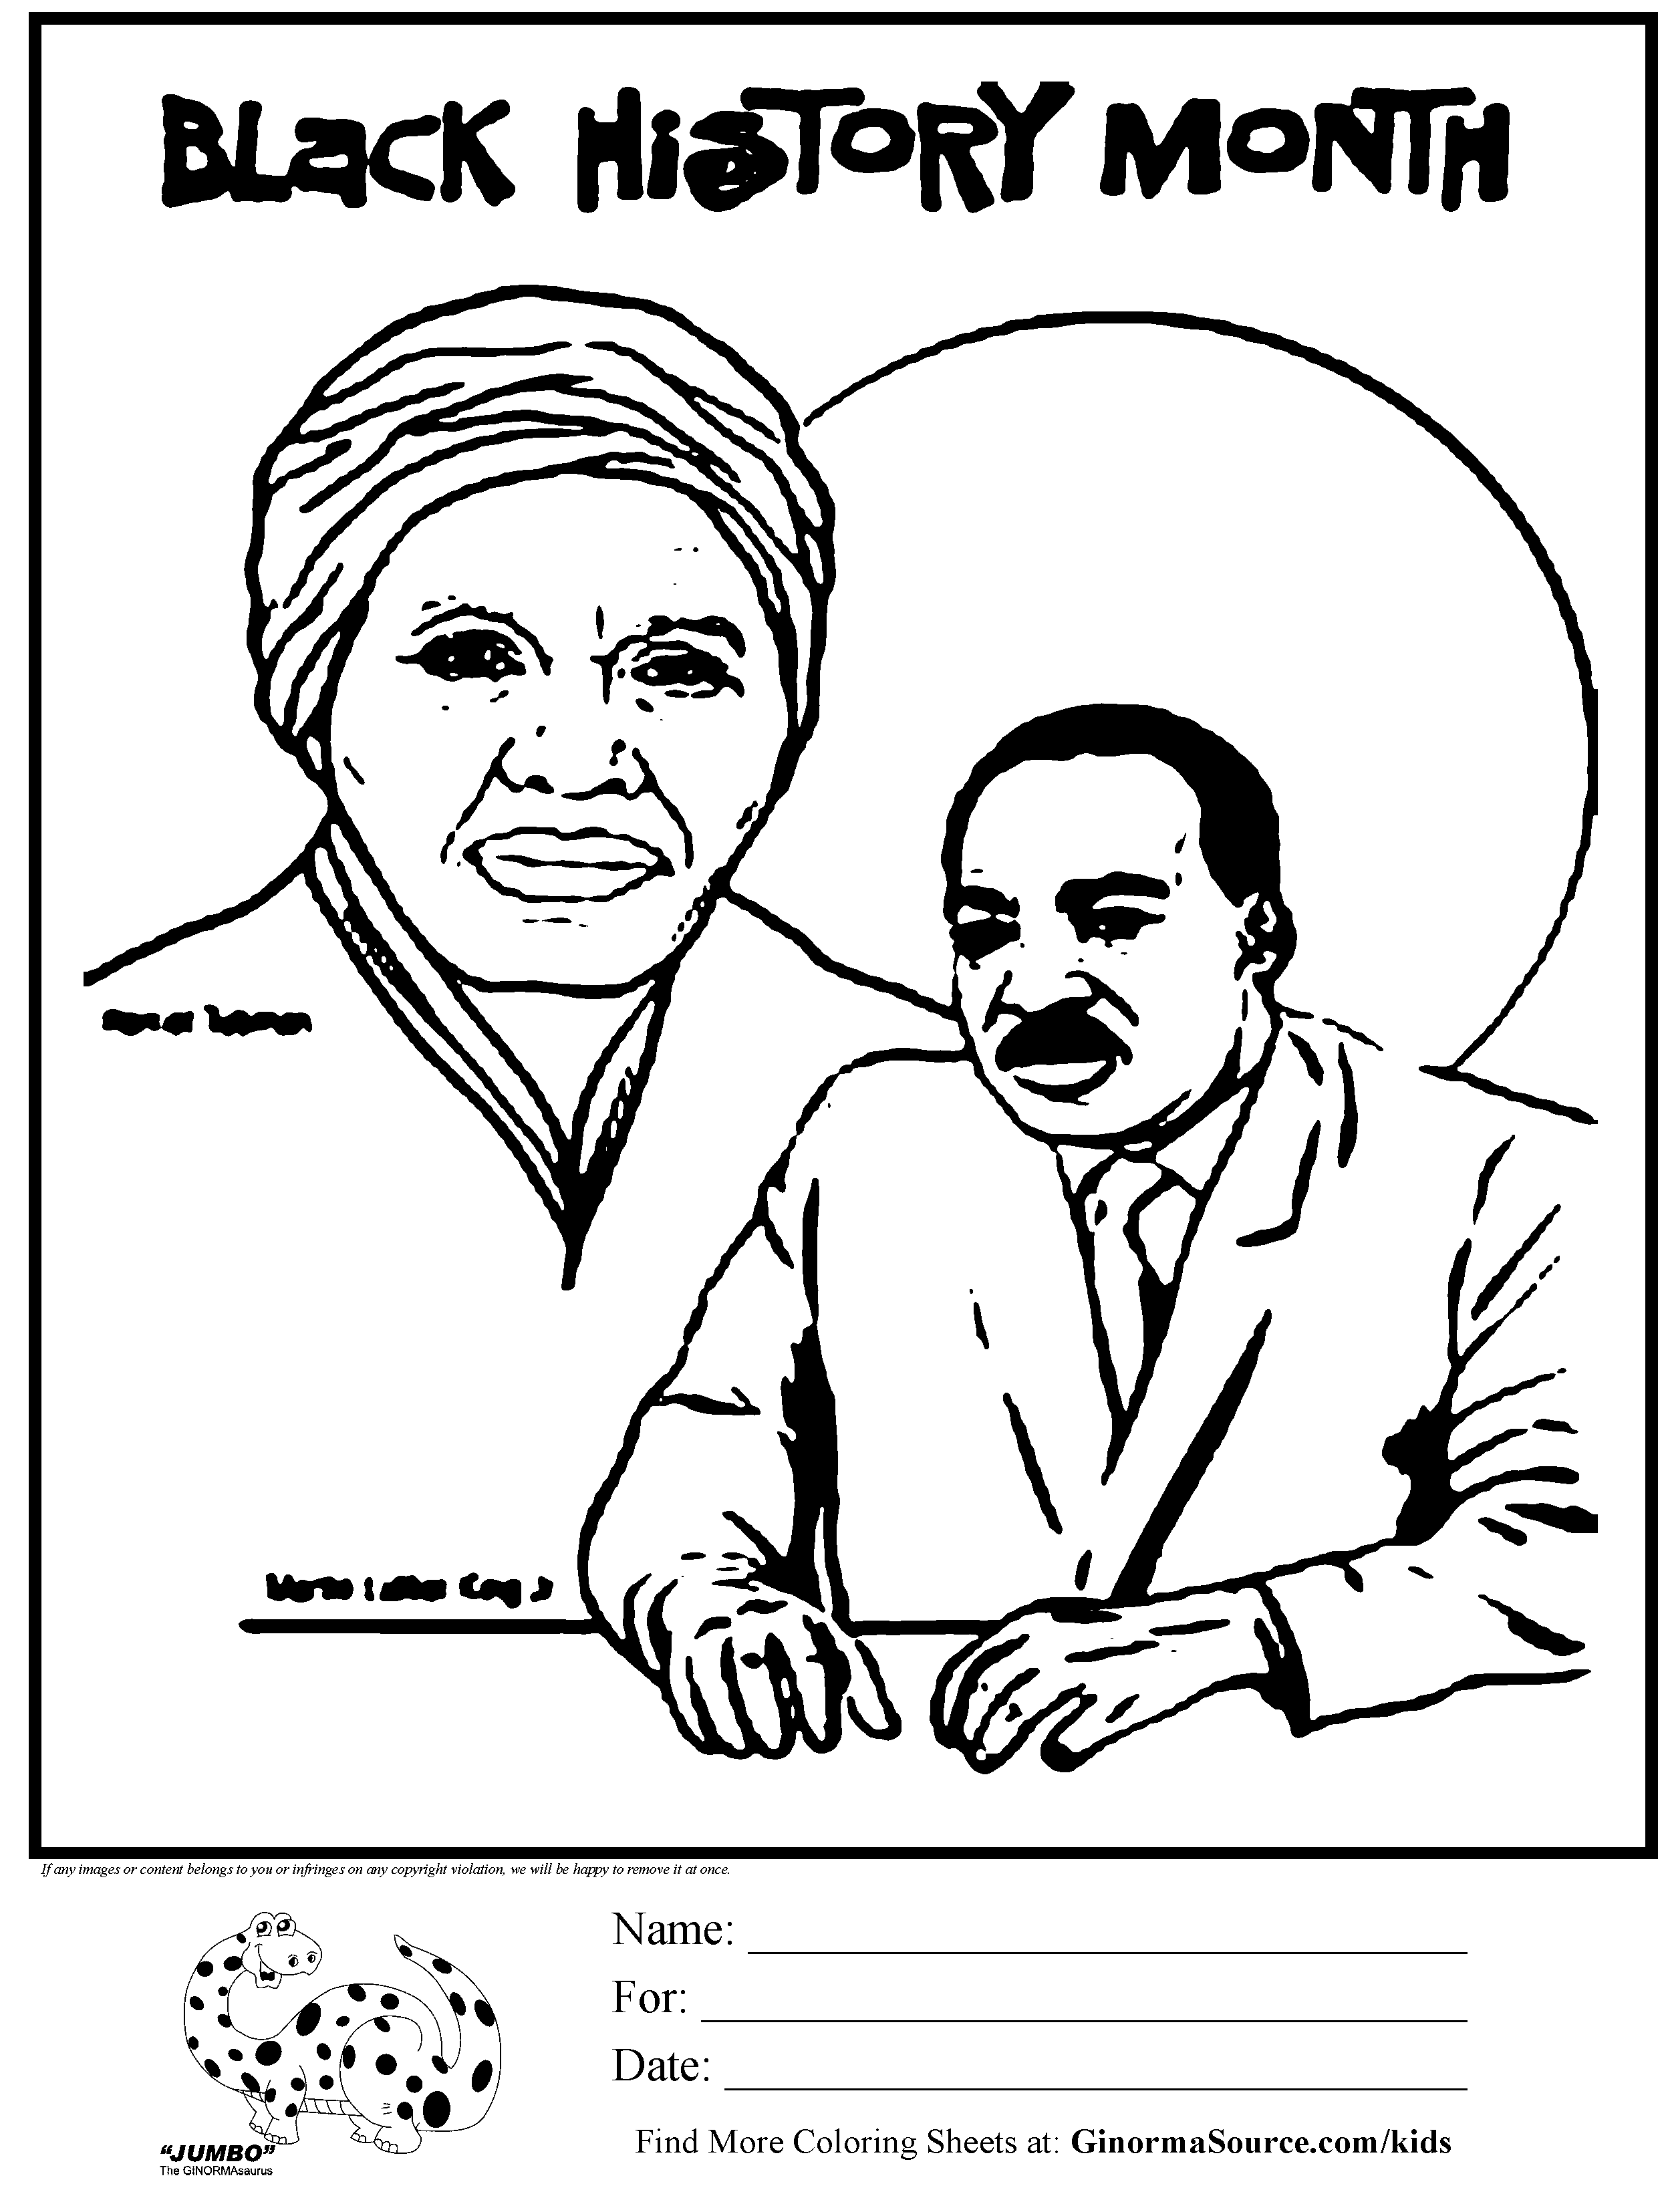 Black History Coloring Pages at Free printable